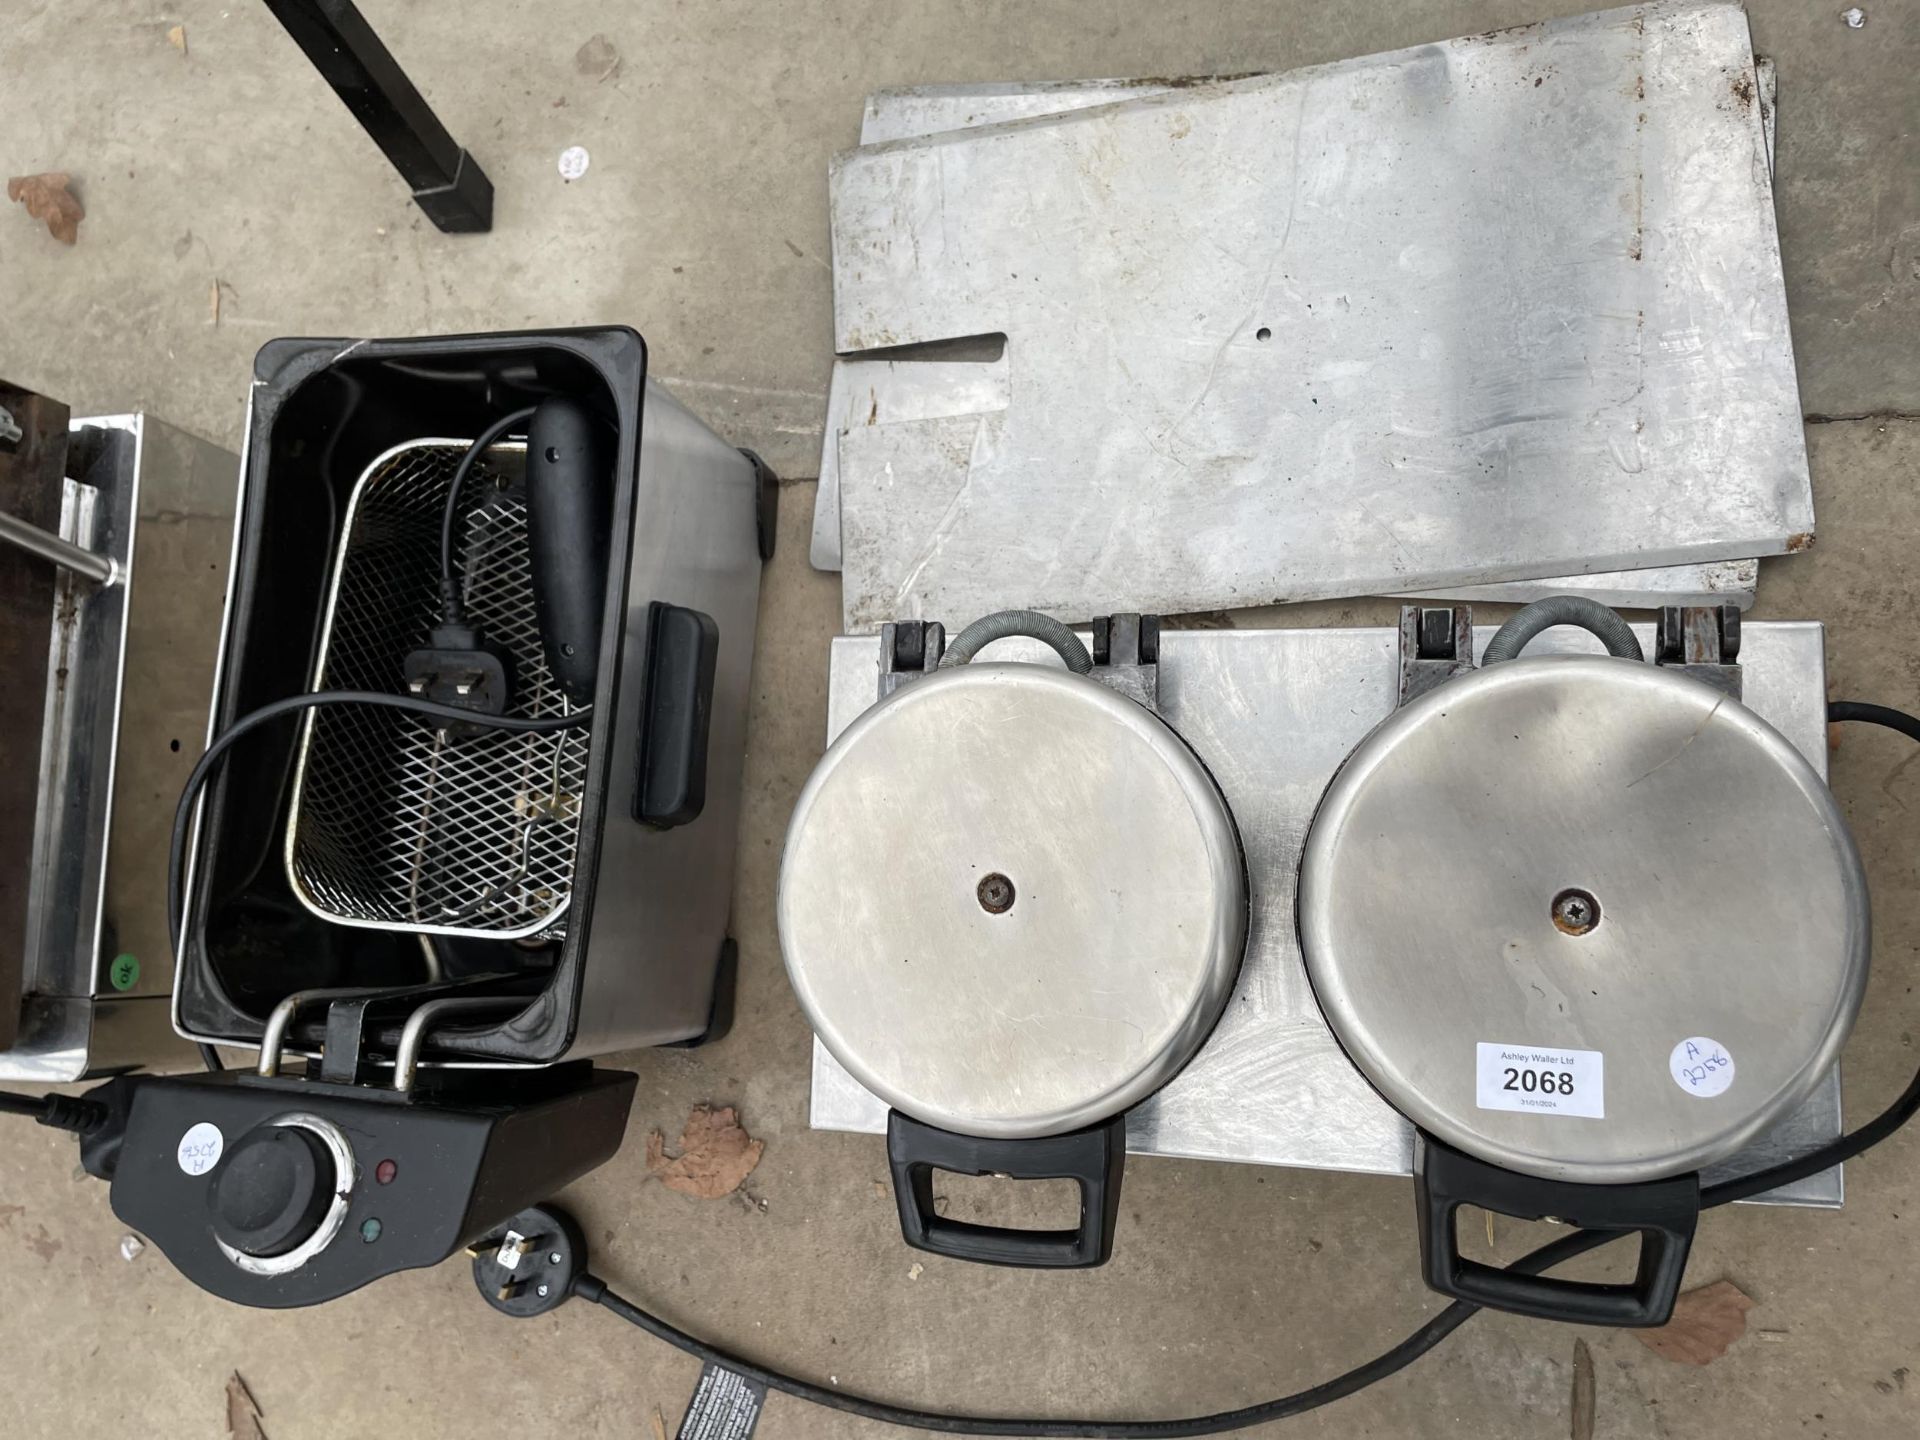 A TWO RING WAFFLE MAKER AND A DEEP FAT FRYER - Image 2 of 2